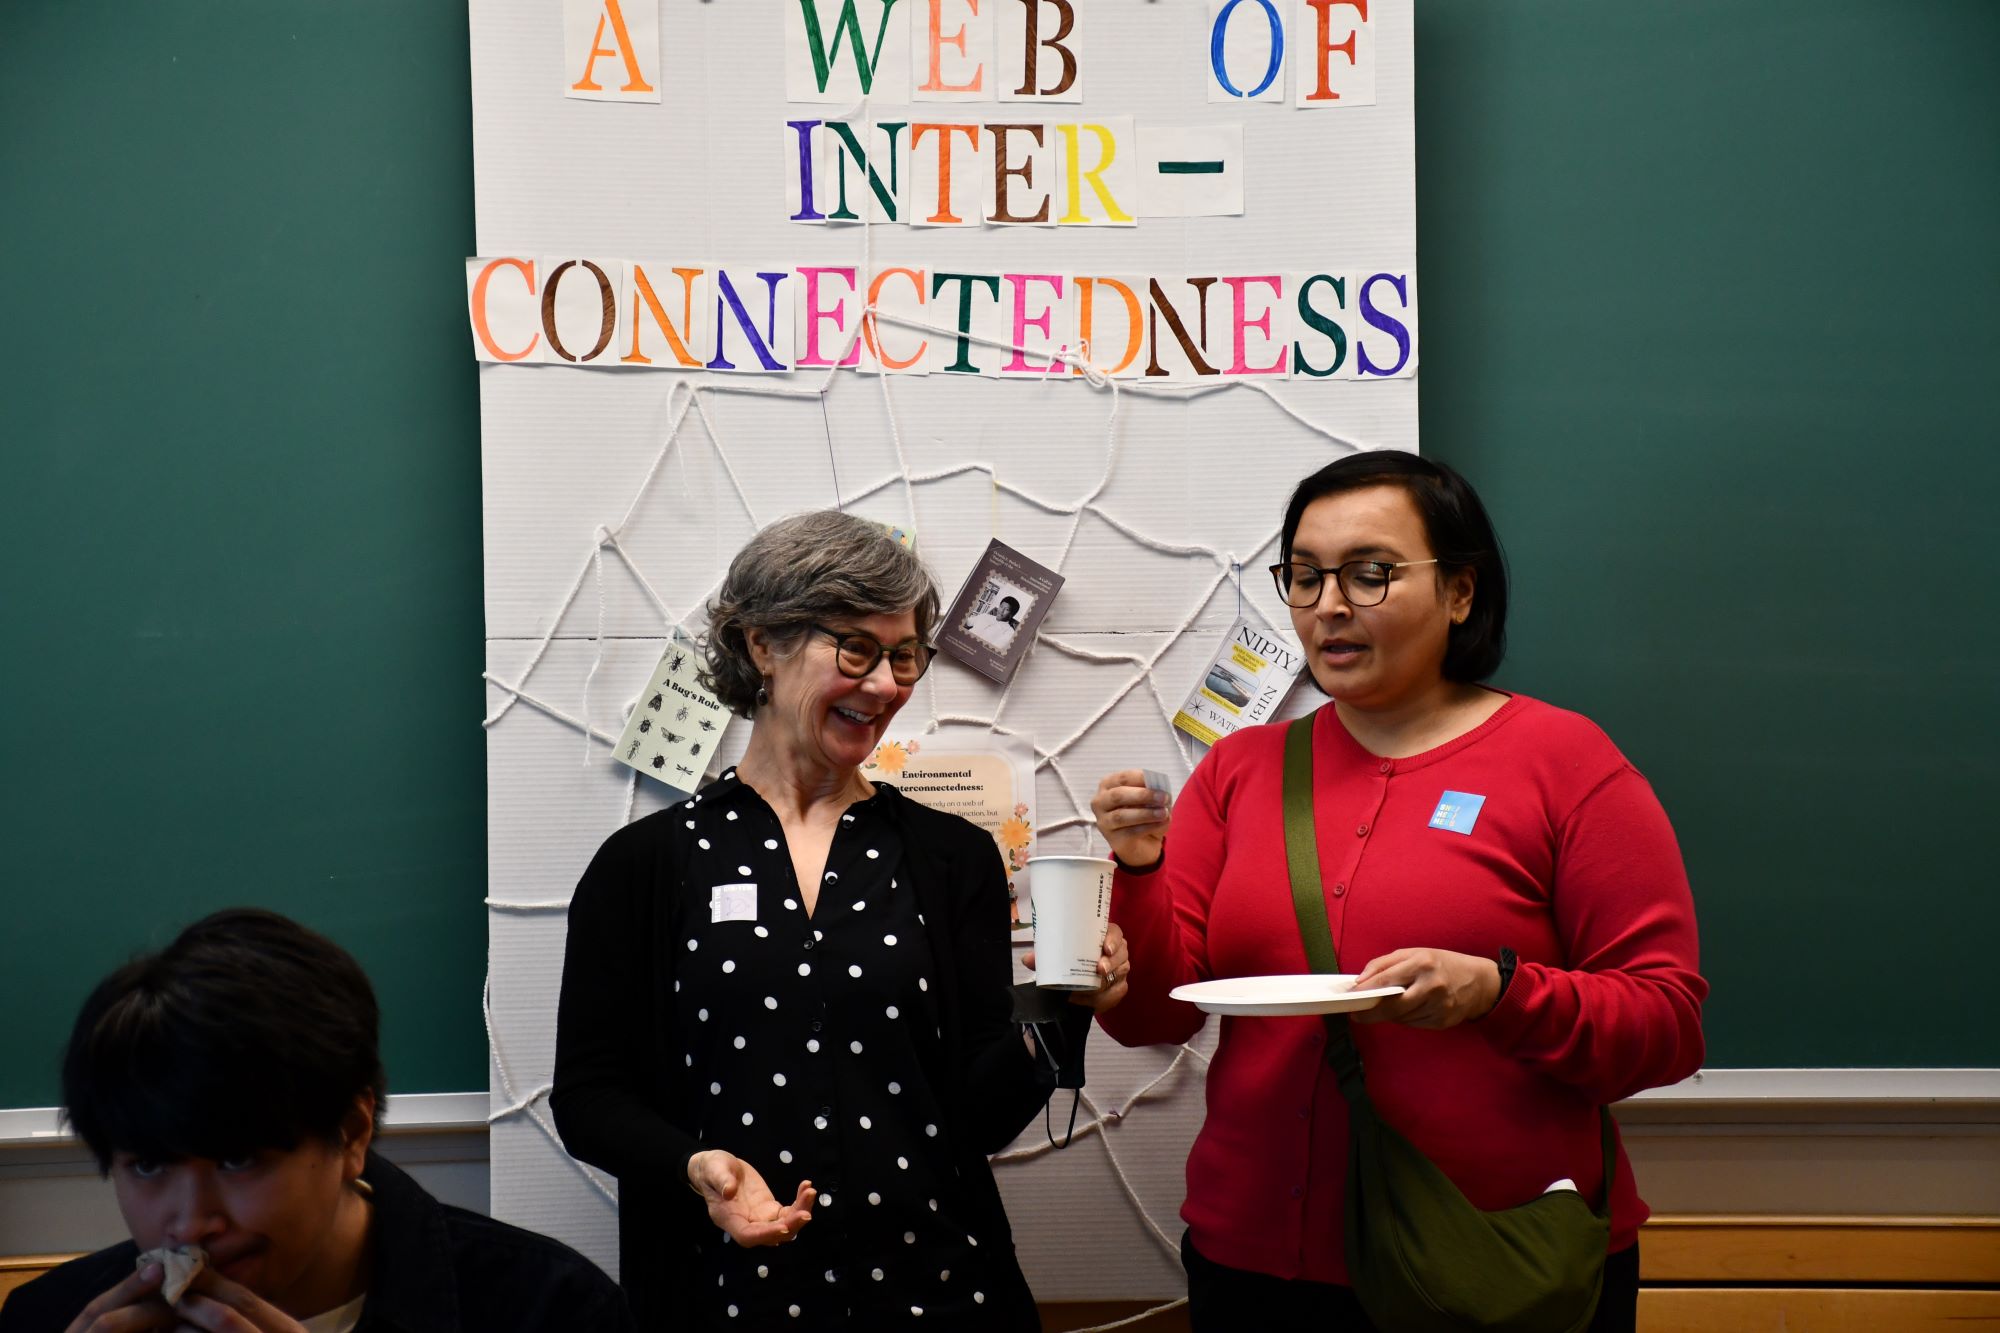 Dr. Fiona Green and Dr. Sharanpal Ruprai announce prize winners while standing in front of the creative contribution, the Web of Interconnectedness, from Dr. Crowe's class